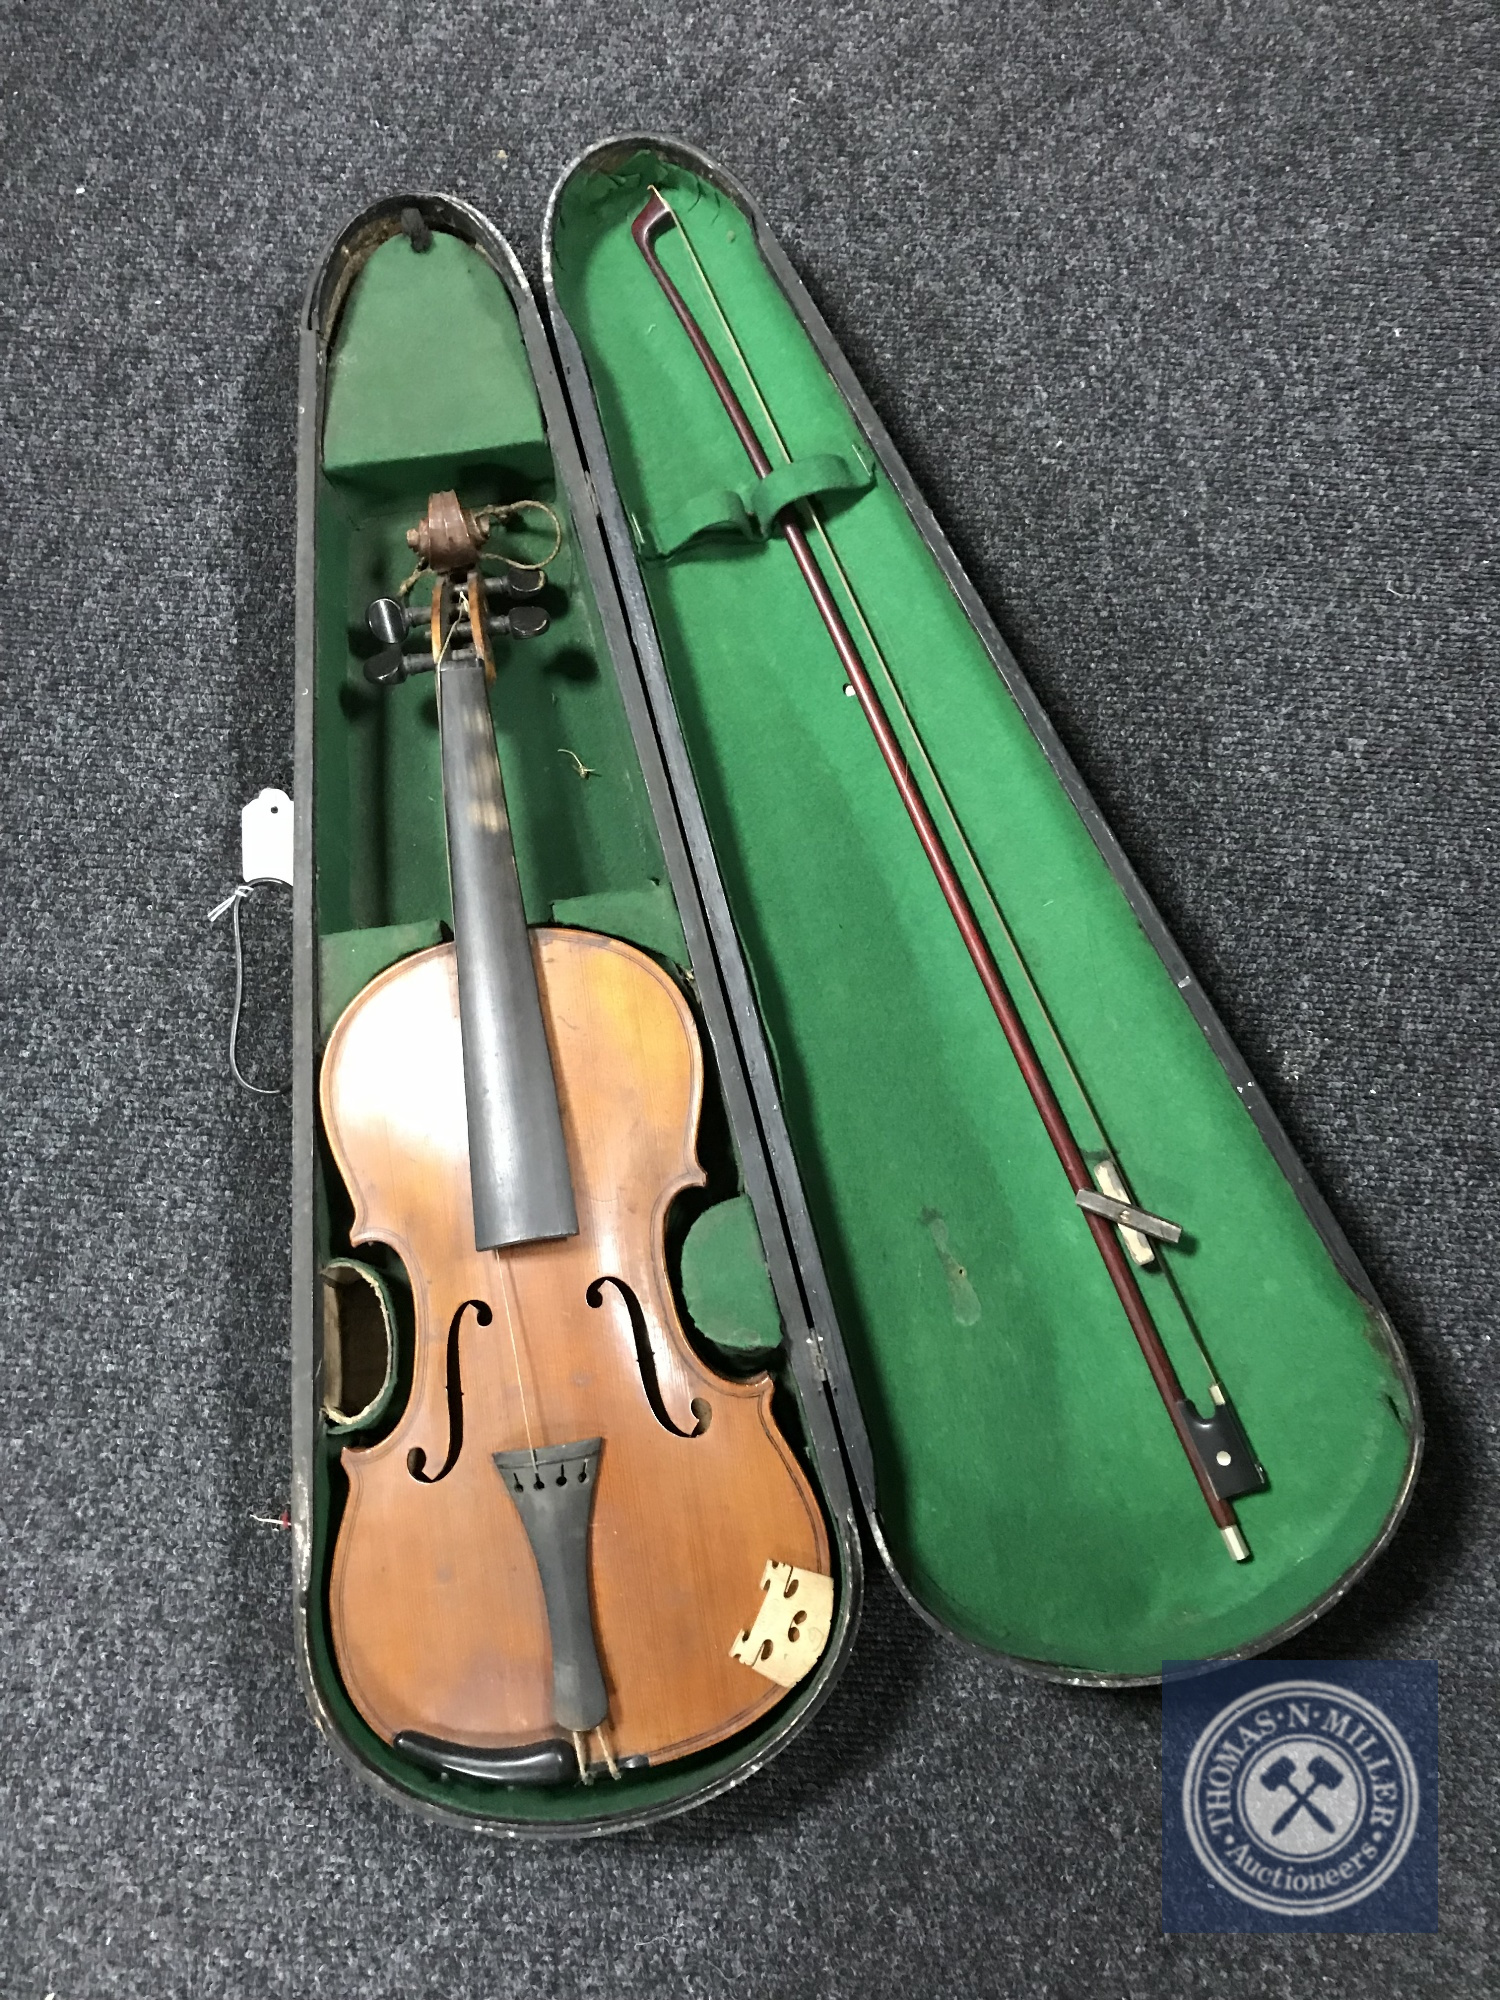 A late 19th/20th century violin and bow in coffin case,